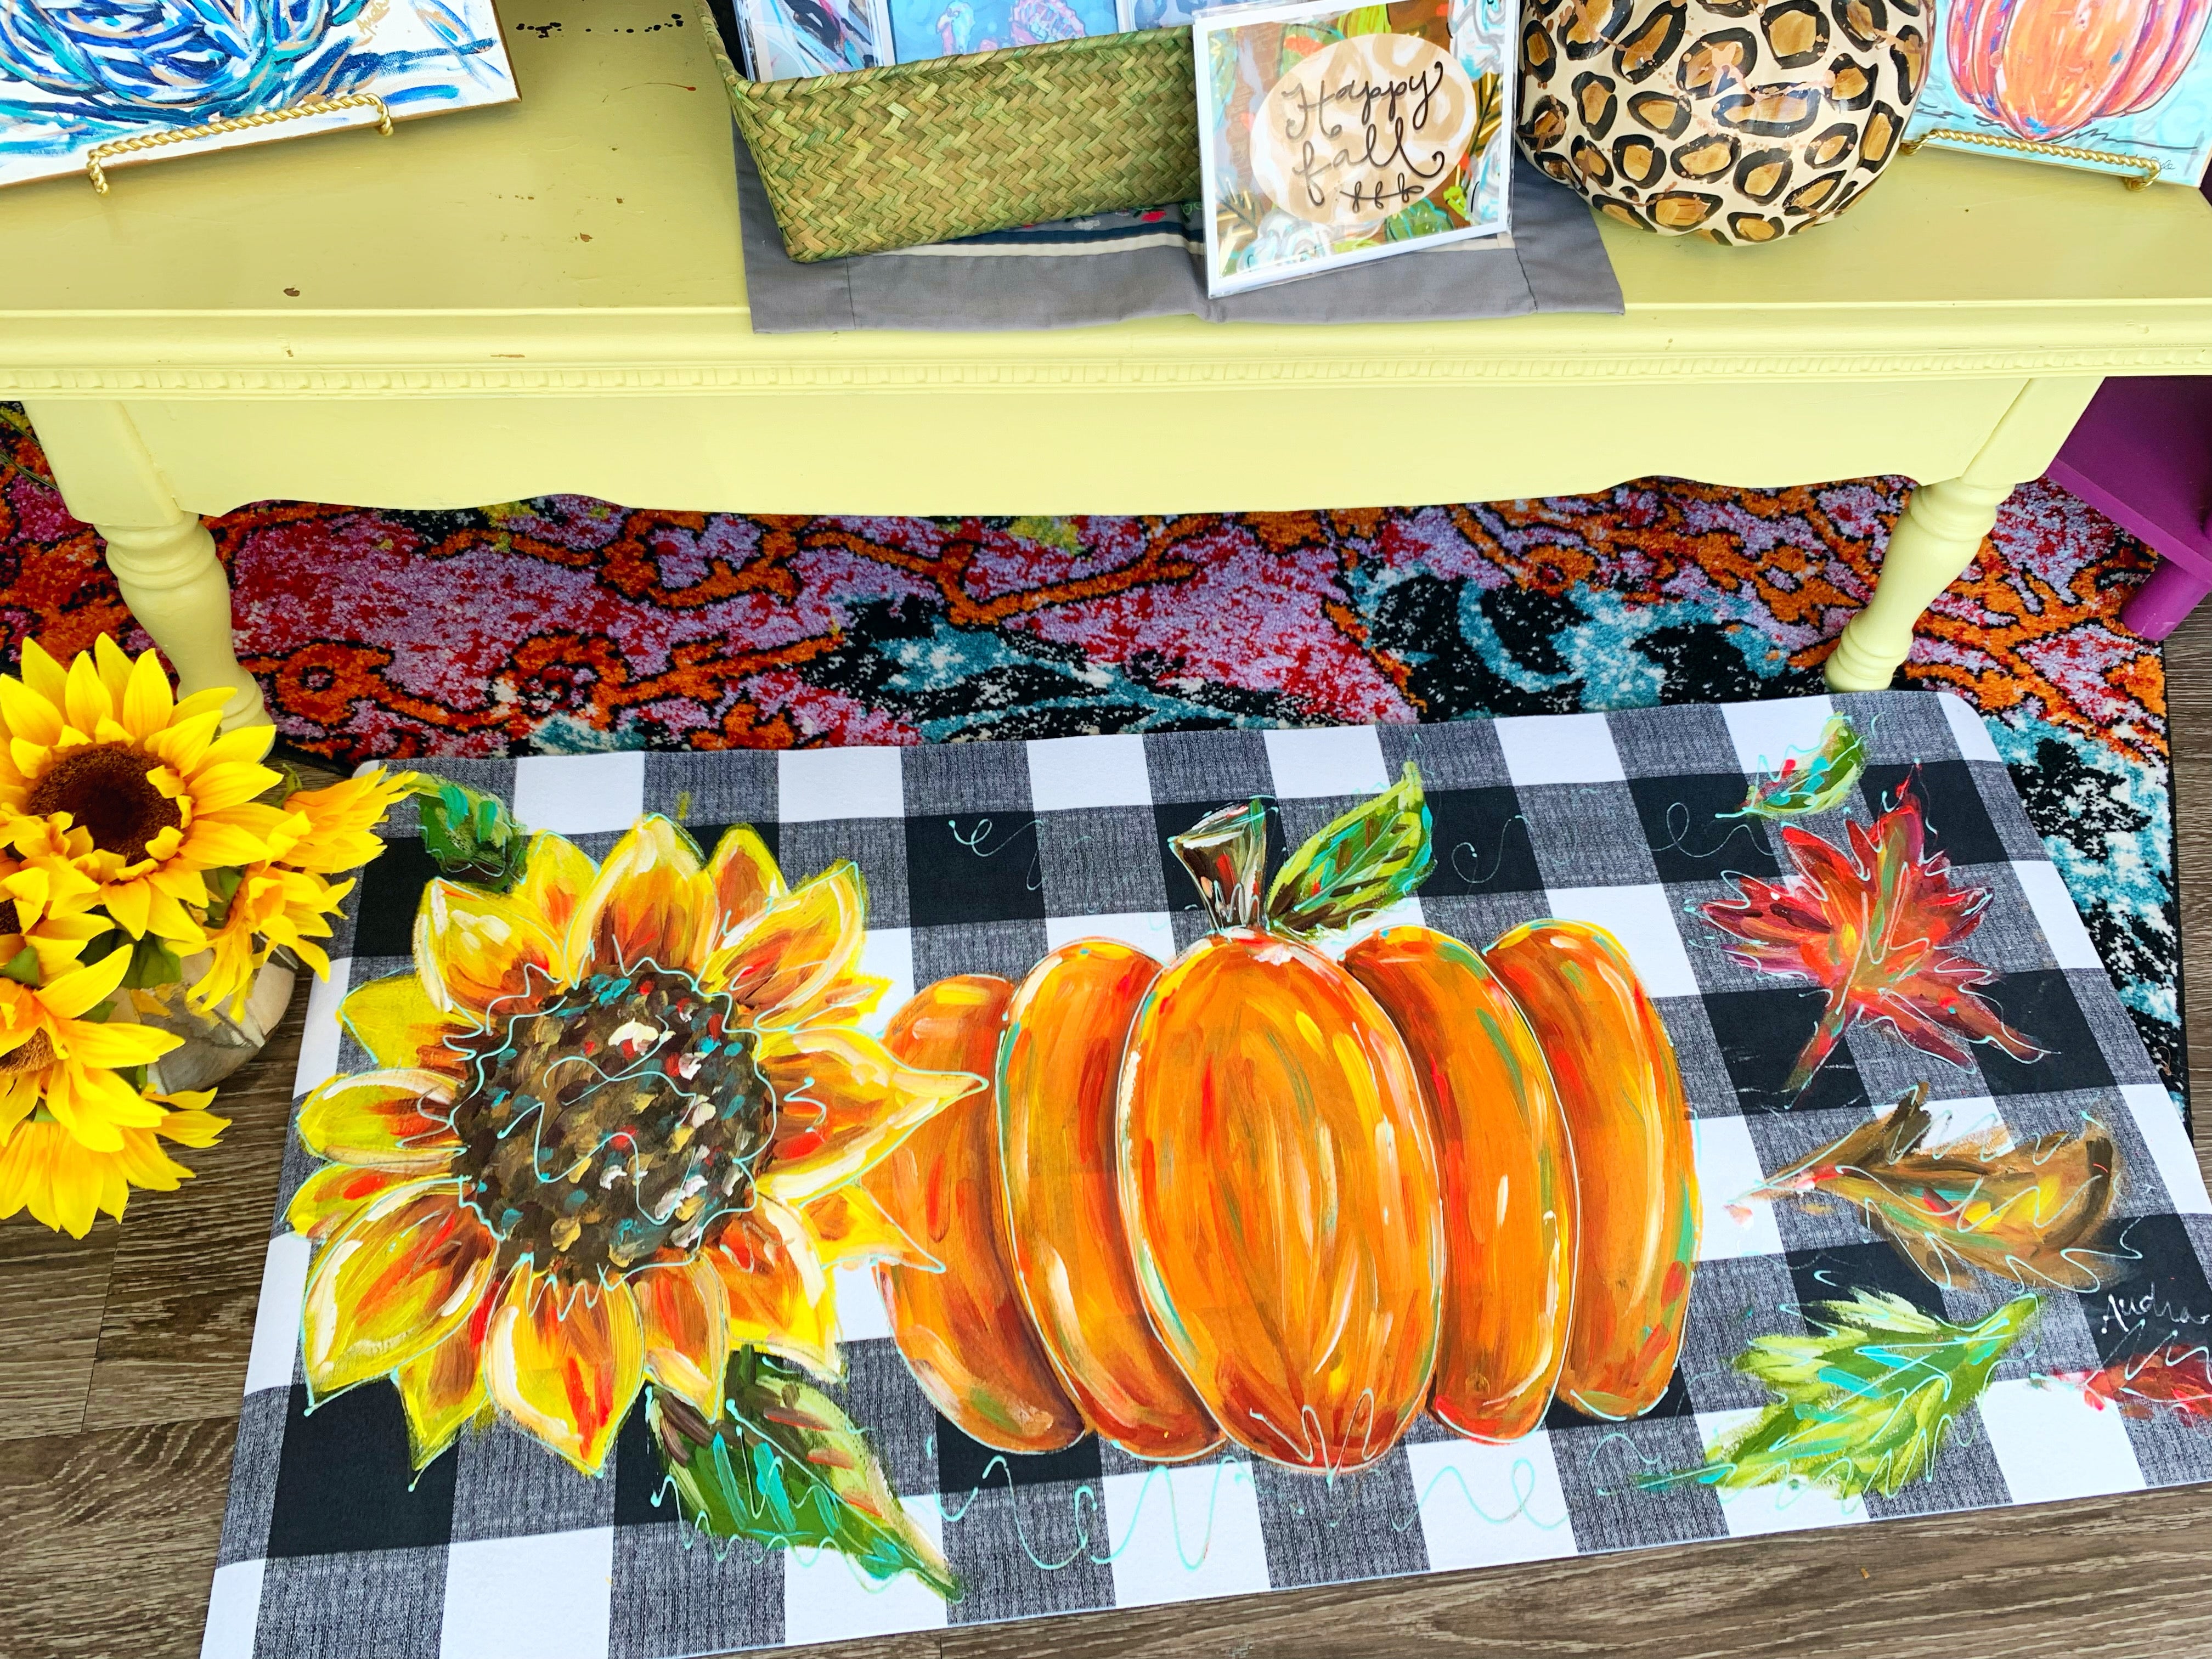 Fall Themed Jewelry, Art and Decor